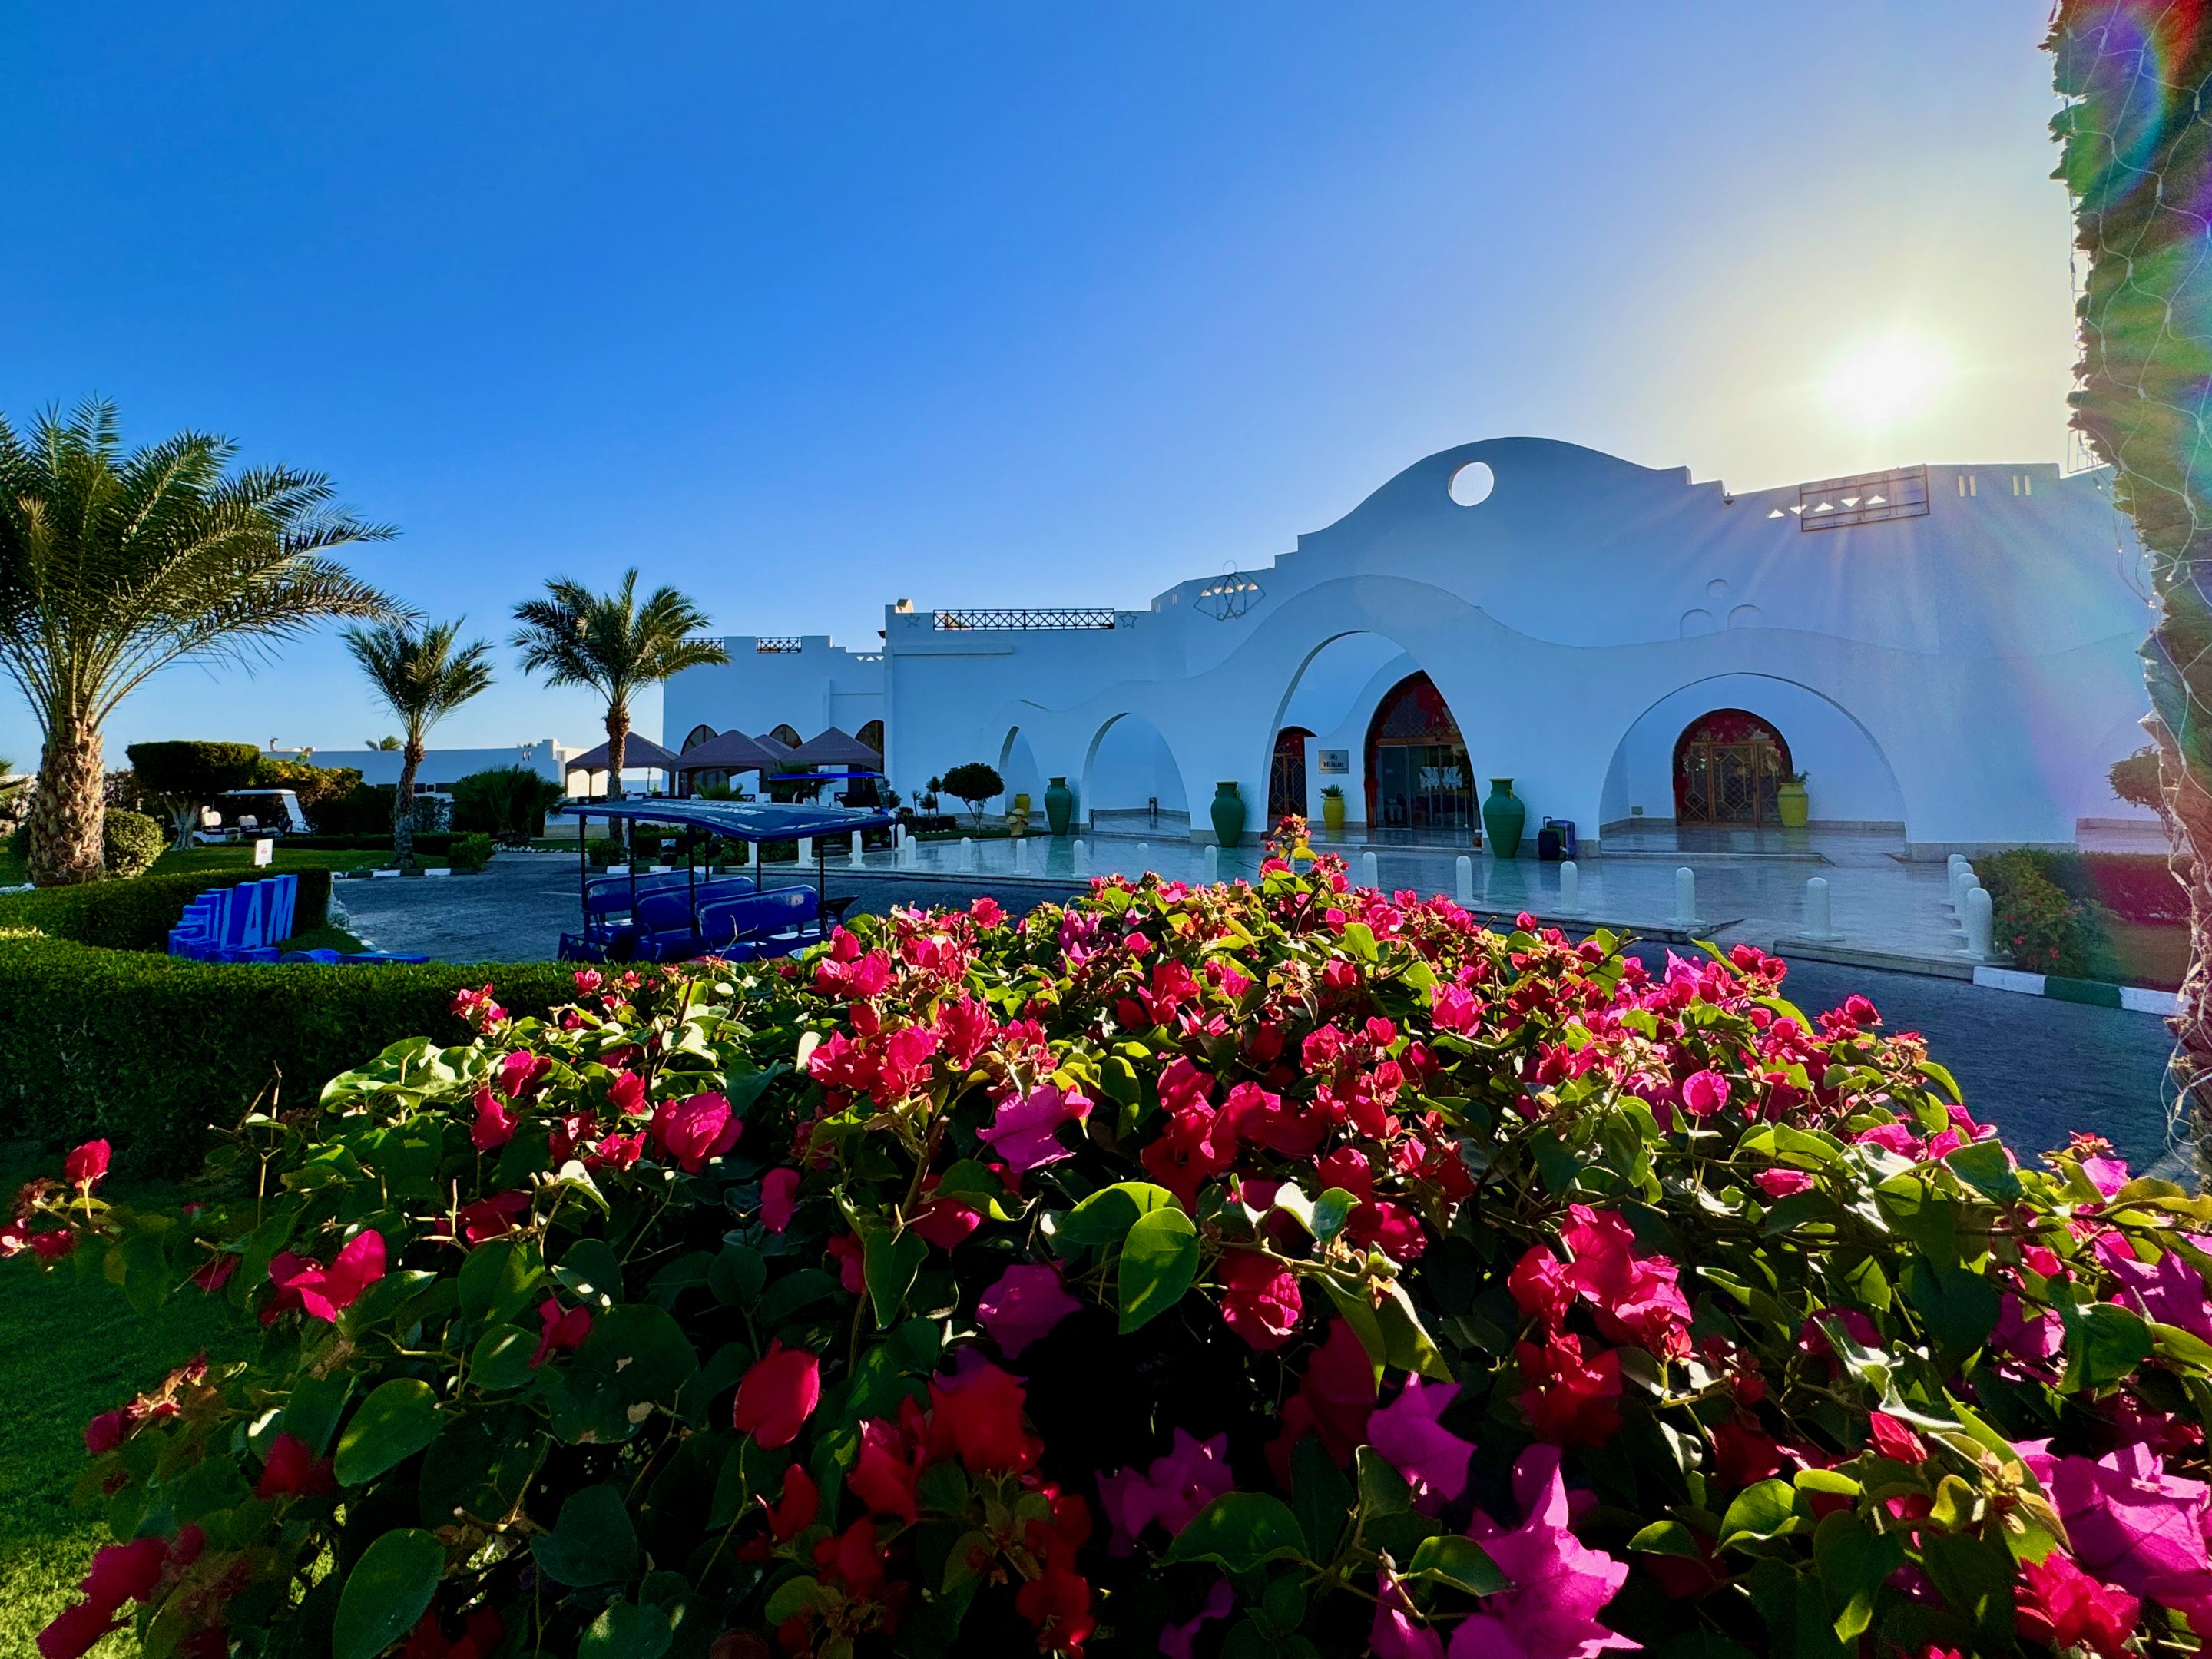 The Hilton Marsa Alam Nubian Resort has one of the most beautiful hotel complexes I have ever visited in Egypt. Photo: Sascha Tegtmeyer Hilton Marsa Alam Nubian Resort Experiences Reviews